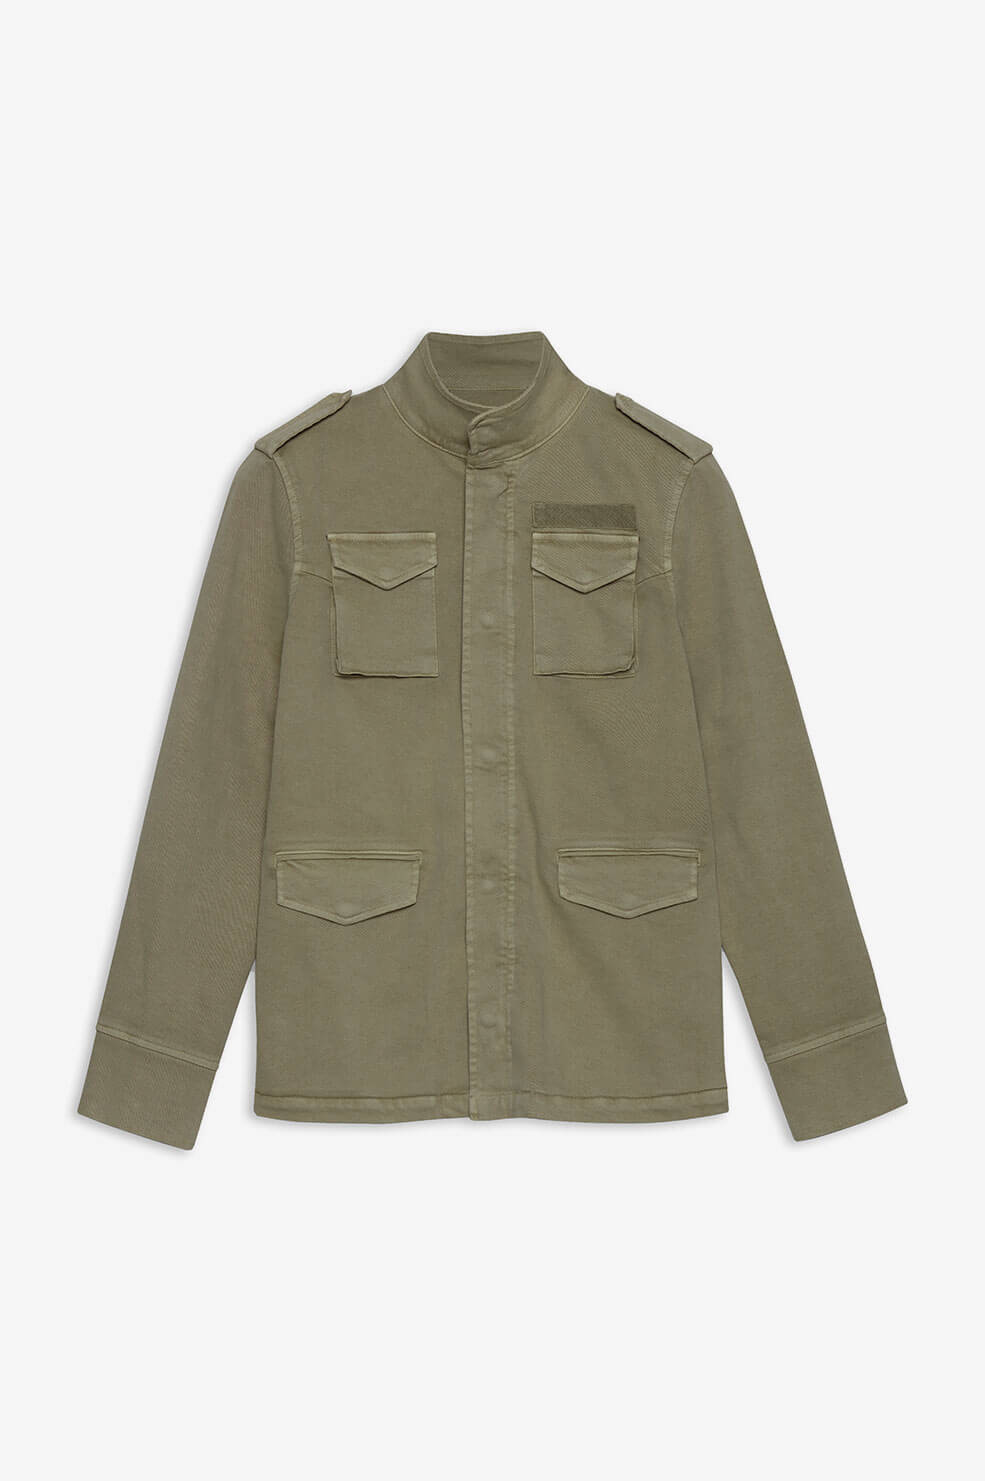 ANINE BING Army Jacket - Front View